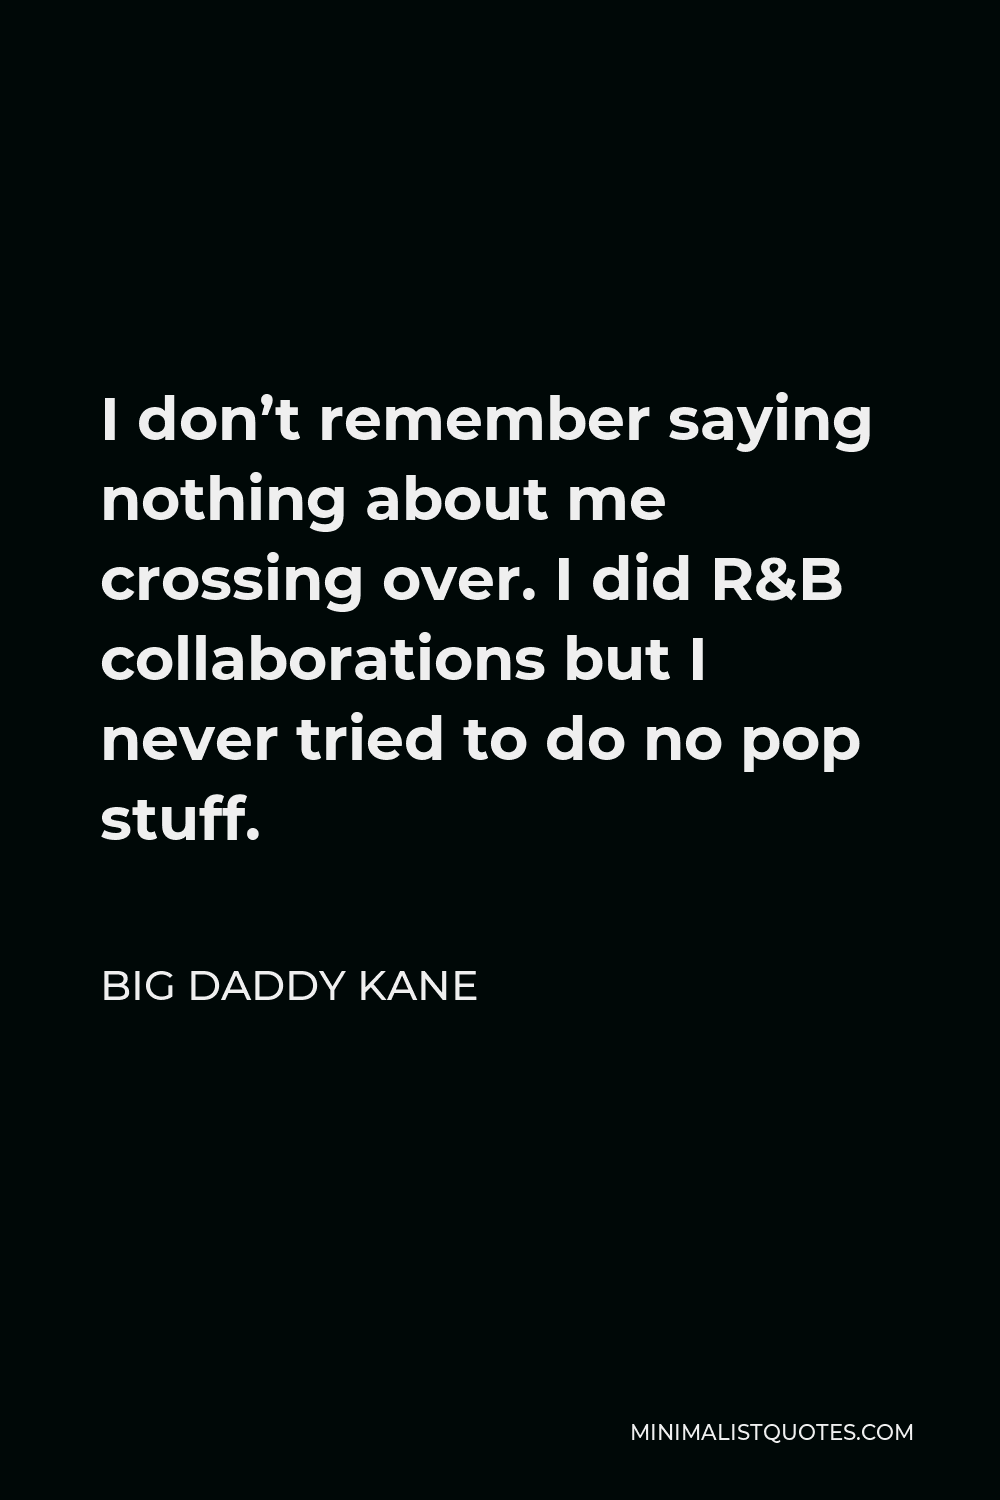 Big Daddy Kane Quote - I don’t remember saying nothing about me crossing over. I did R&B collaborations but I never tried to do no pop stuff.